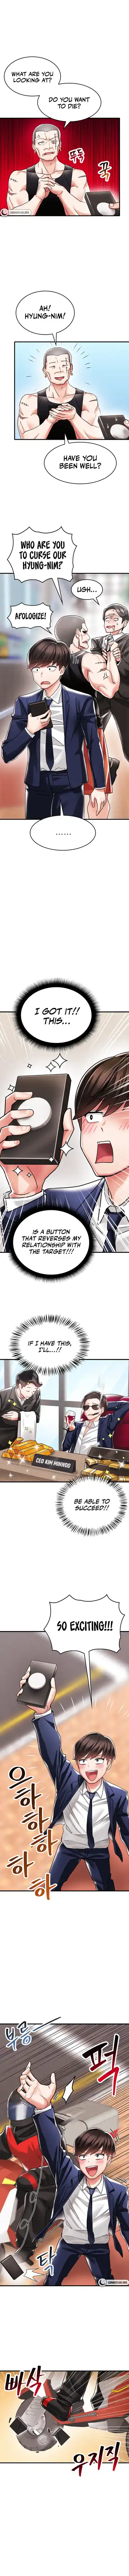 [Gaehoju] Relationship Reverse Button: Let's Make Her Submissive Fhentai.net - Page 21